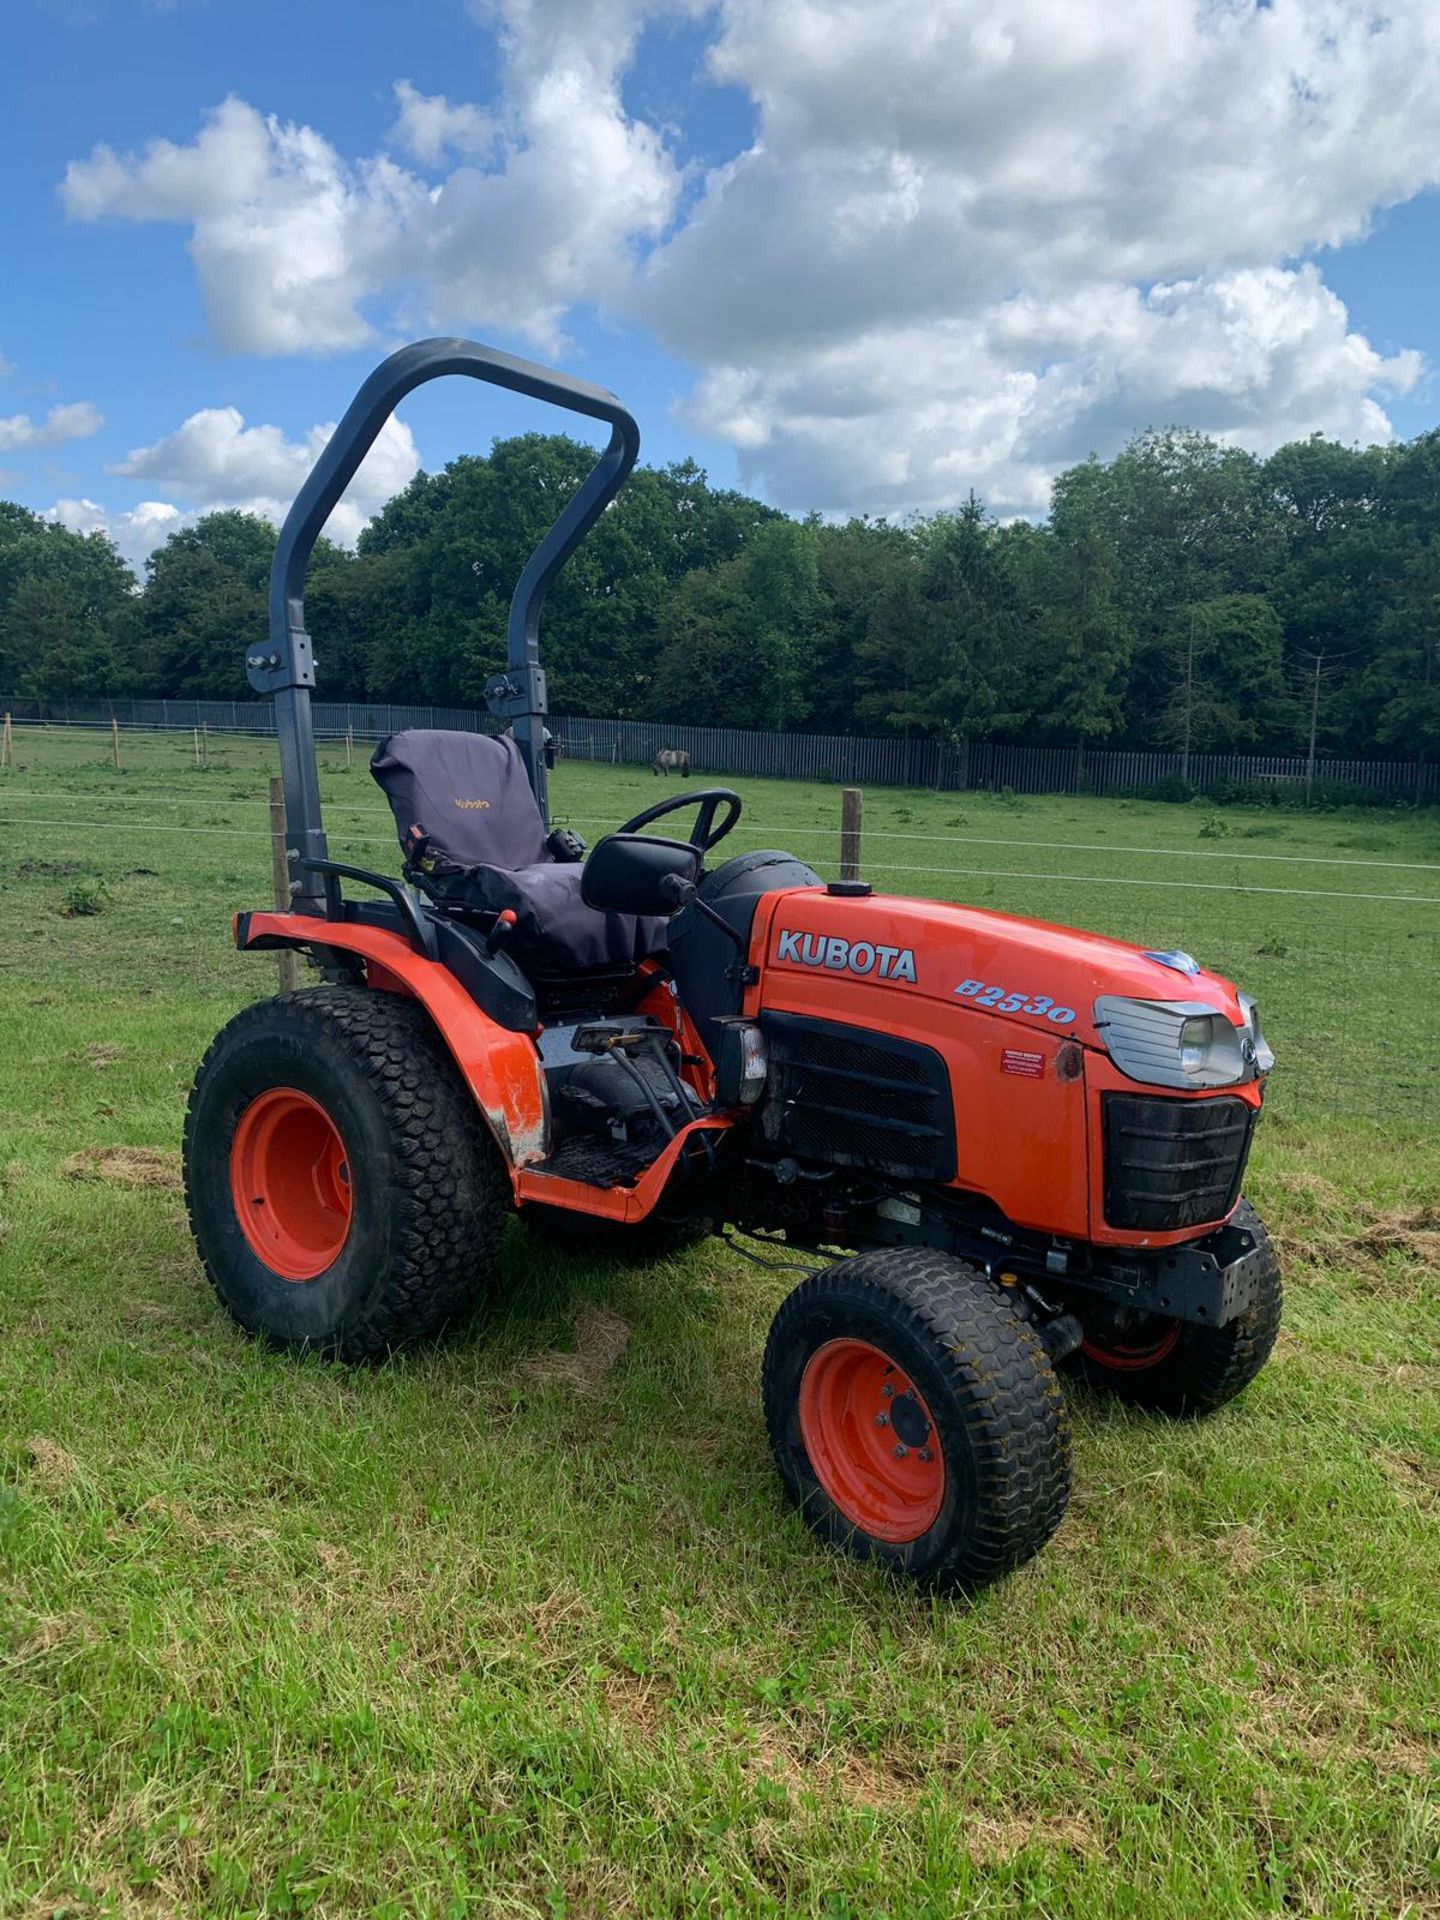 2017/17 REG KUBOTA B2530 COMPACT TRACTOR, RUNS AND WORKS, SHOWING 1989 HOURS *PLUS VAT* - Image 2 of 13